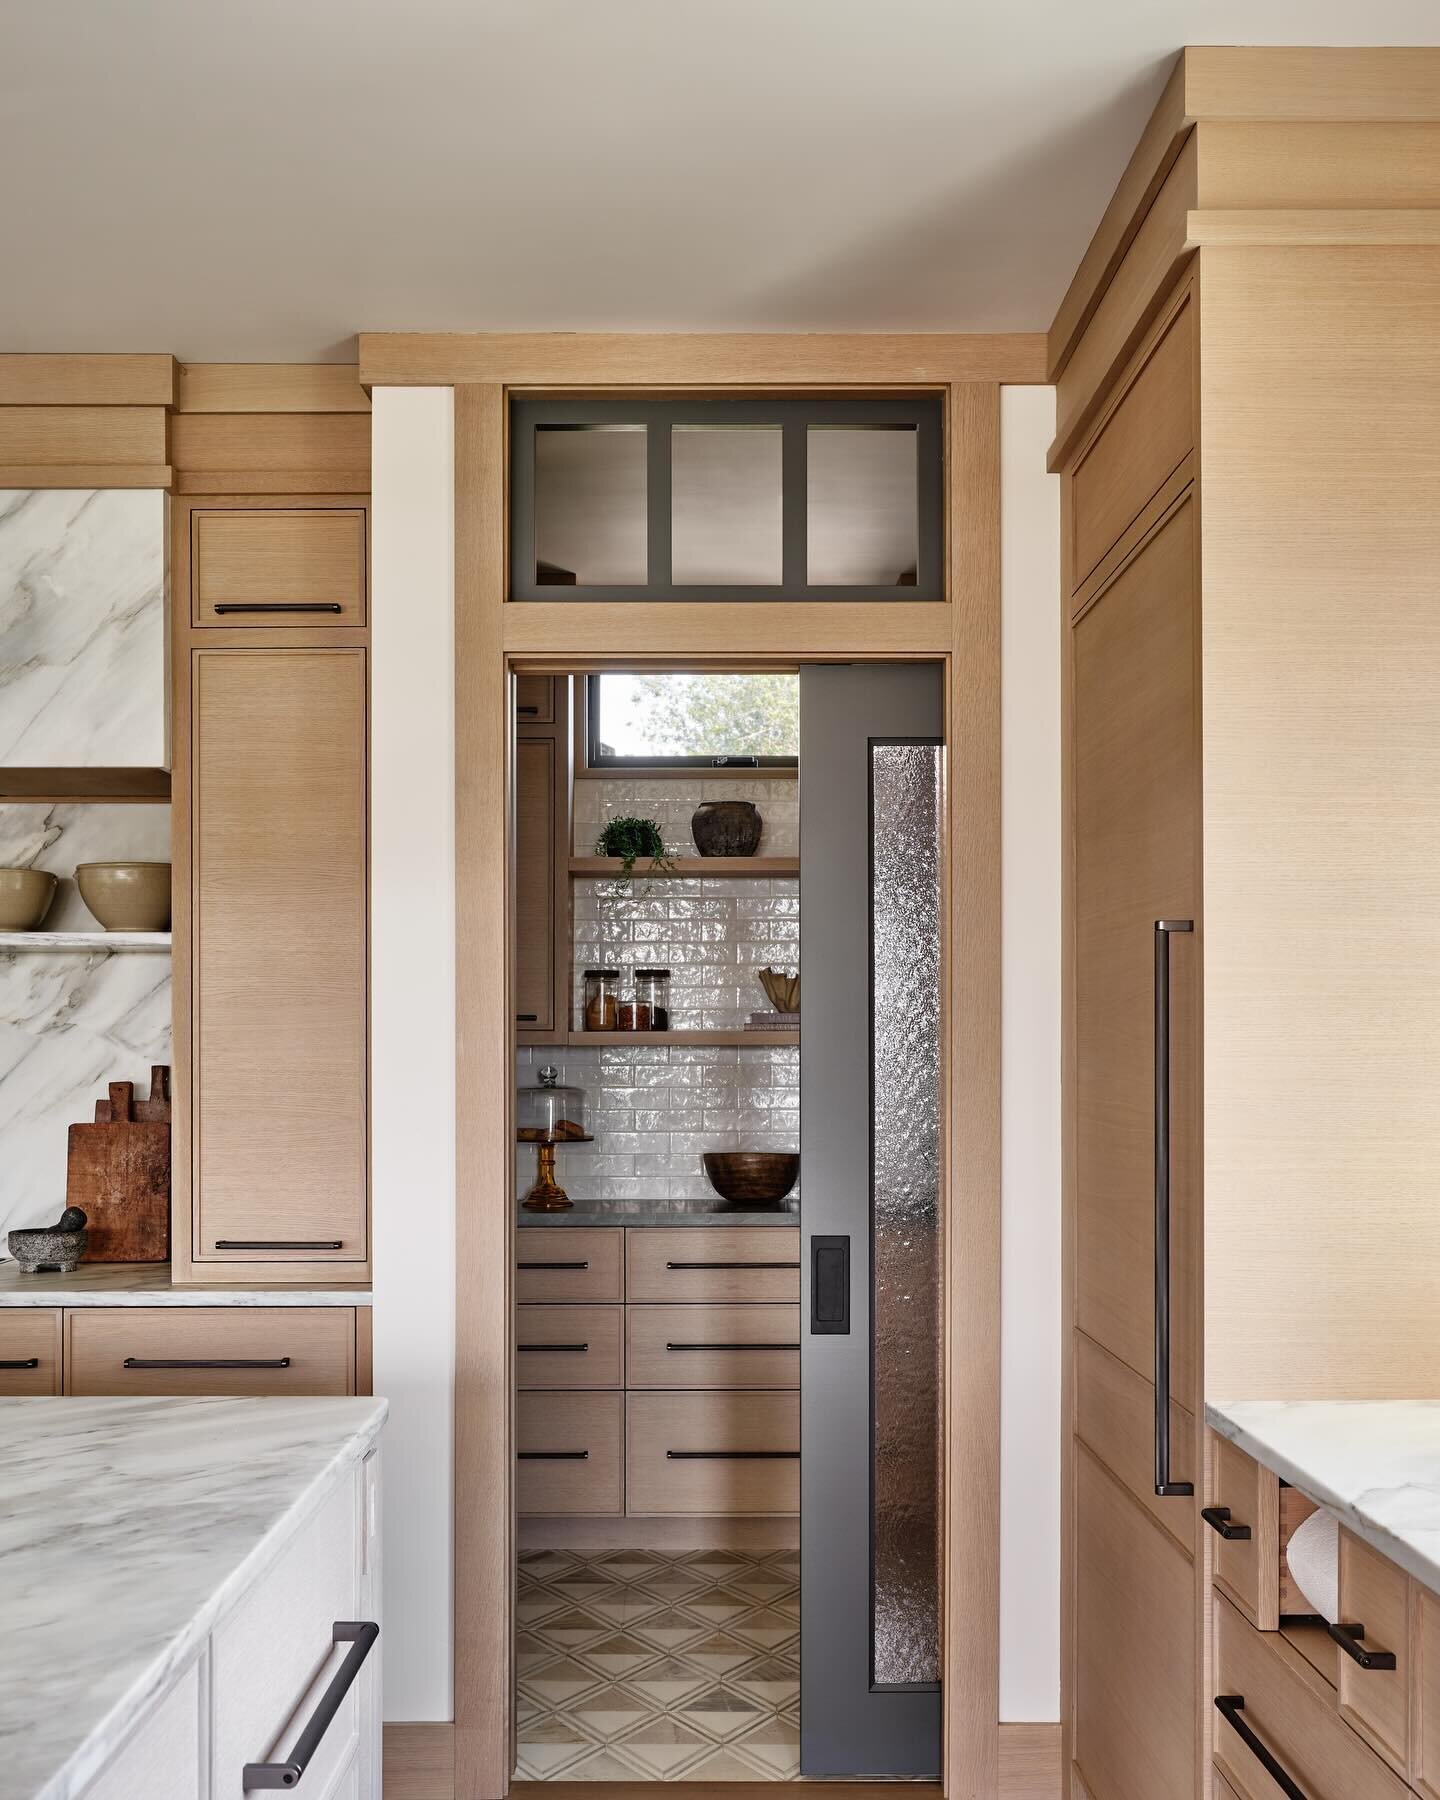 POV: THIS is your pantry 🤩 #CoveHouse
 &bull;
📸: @readmckendree 
&bull;
&bull;
&bull; 
Project Team: @dimauroarchitects @kandrconstruction_ri @moorehousedesign @haasdesign.studio

*designed while head of interiors at DiMauro Architects

#architectu